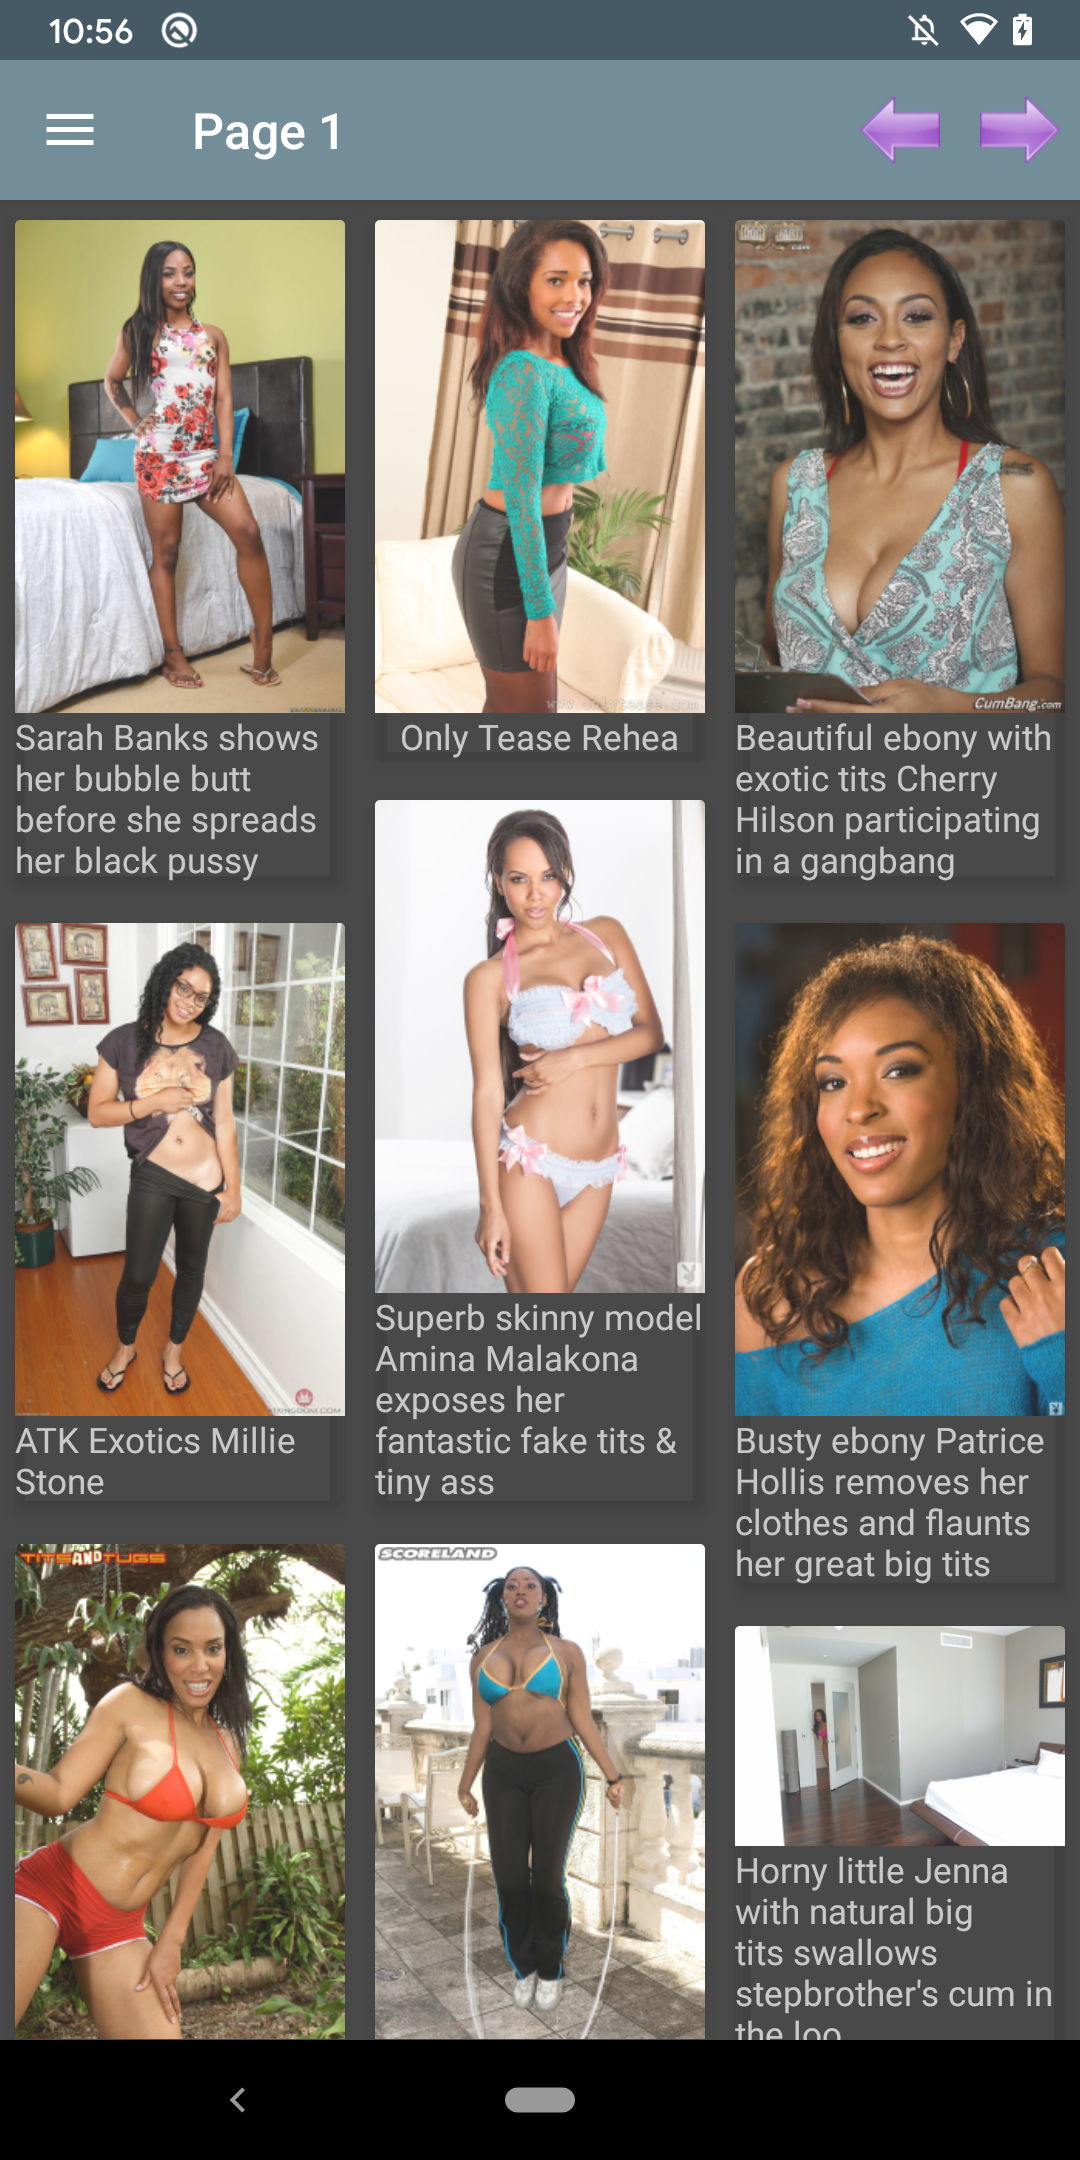 Ebony galleries app,pic,sexy,hot,top,android,wallpapers,galleries,hentia,offline,hentai,topless,pictures,anime,apps,porn,caprice,pornstar